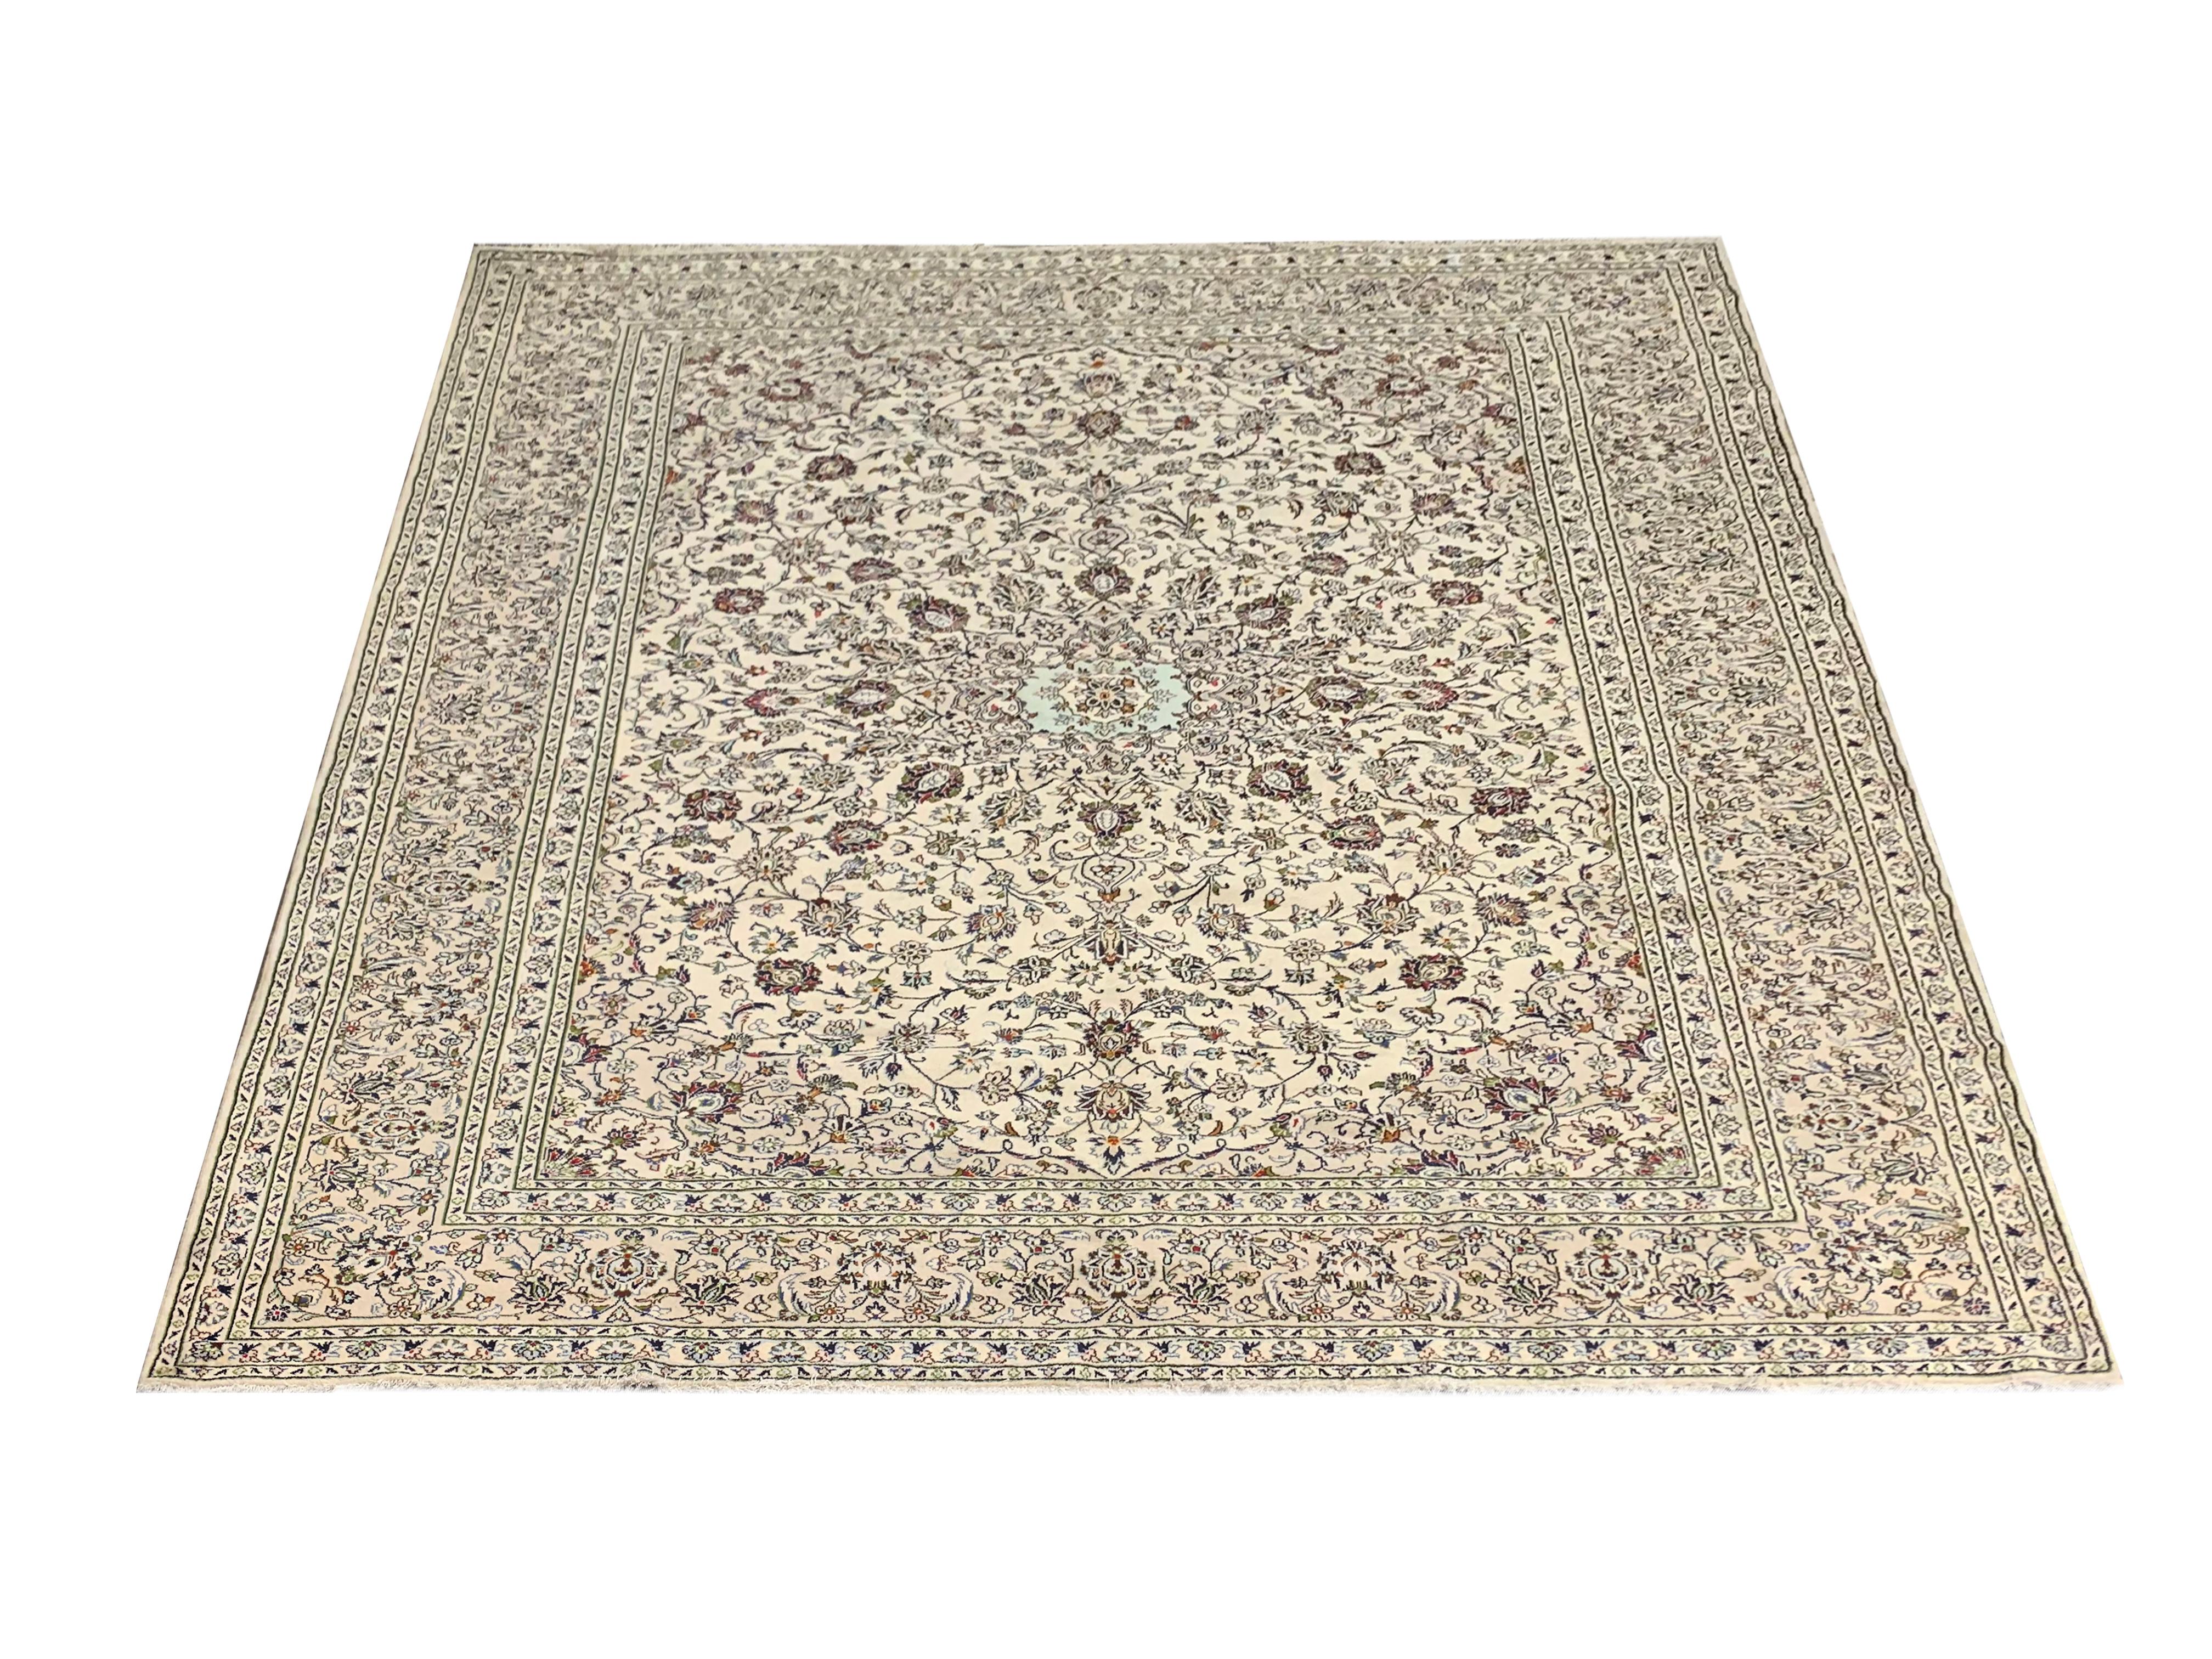 A bold, symmetrical pattern adorns this fine wool area rug, woven with a sophisticated yet simple colour palette of cream, beige, brown and light blue. Featuring an elegant central medallion that has been enclosed by a highly-decorative floral